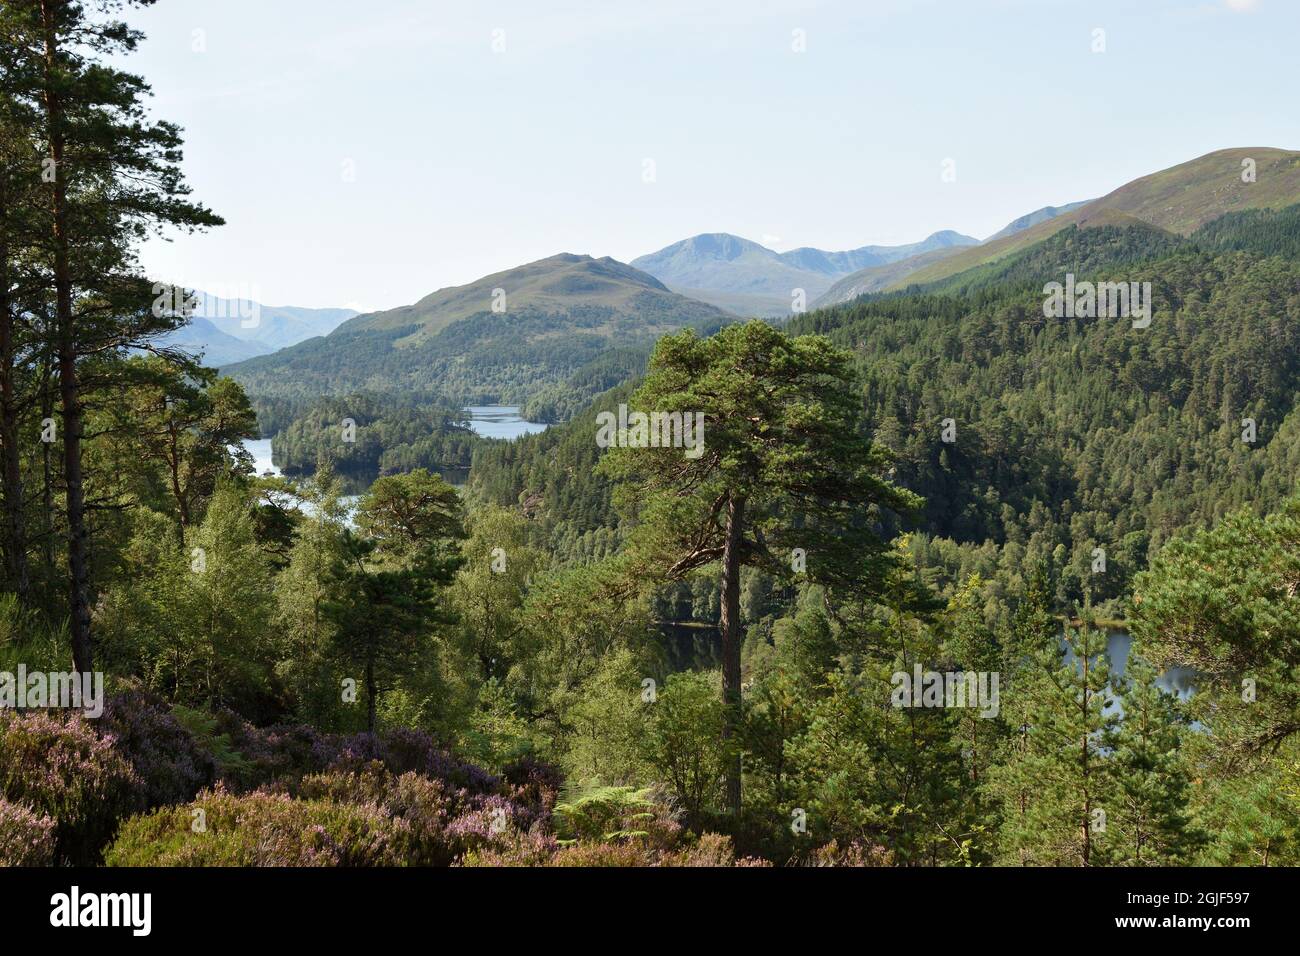 Glen Affric from the viewpoint on the Affric Kintail Way above Loch Beinn a Mheadhoin. Highlands, Scotland, UK. Stock Photo